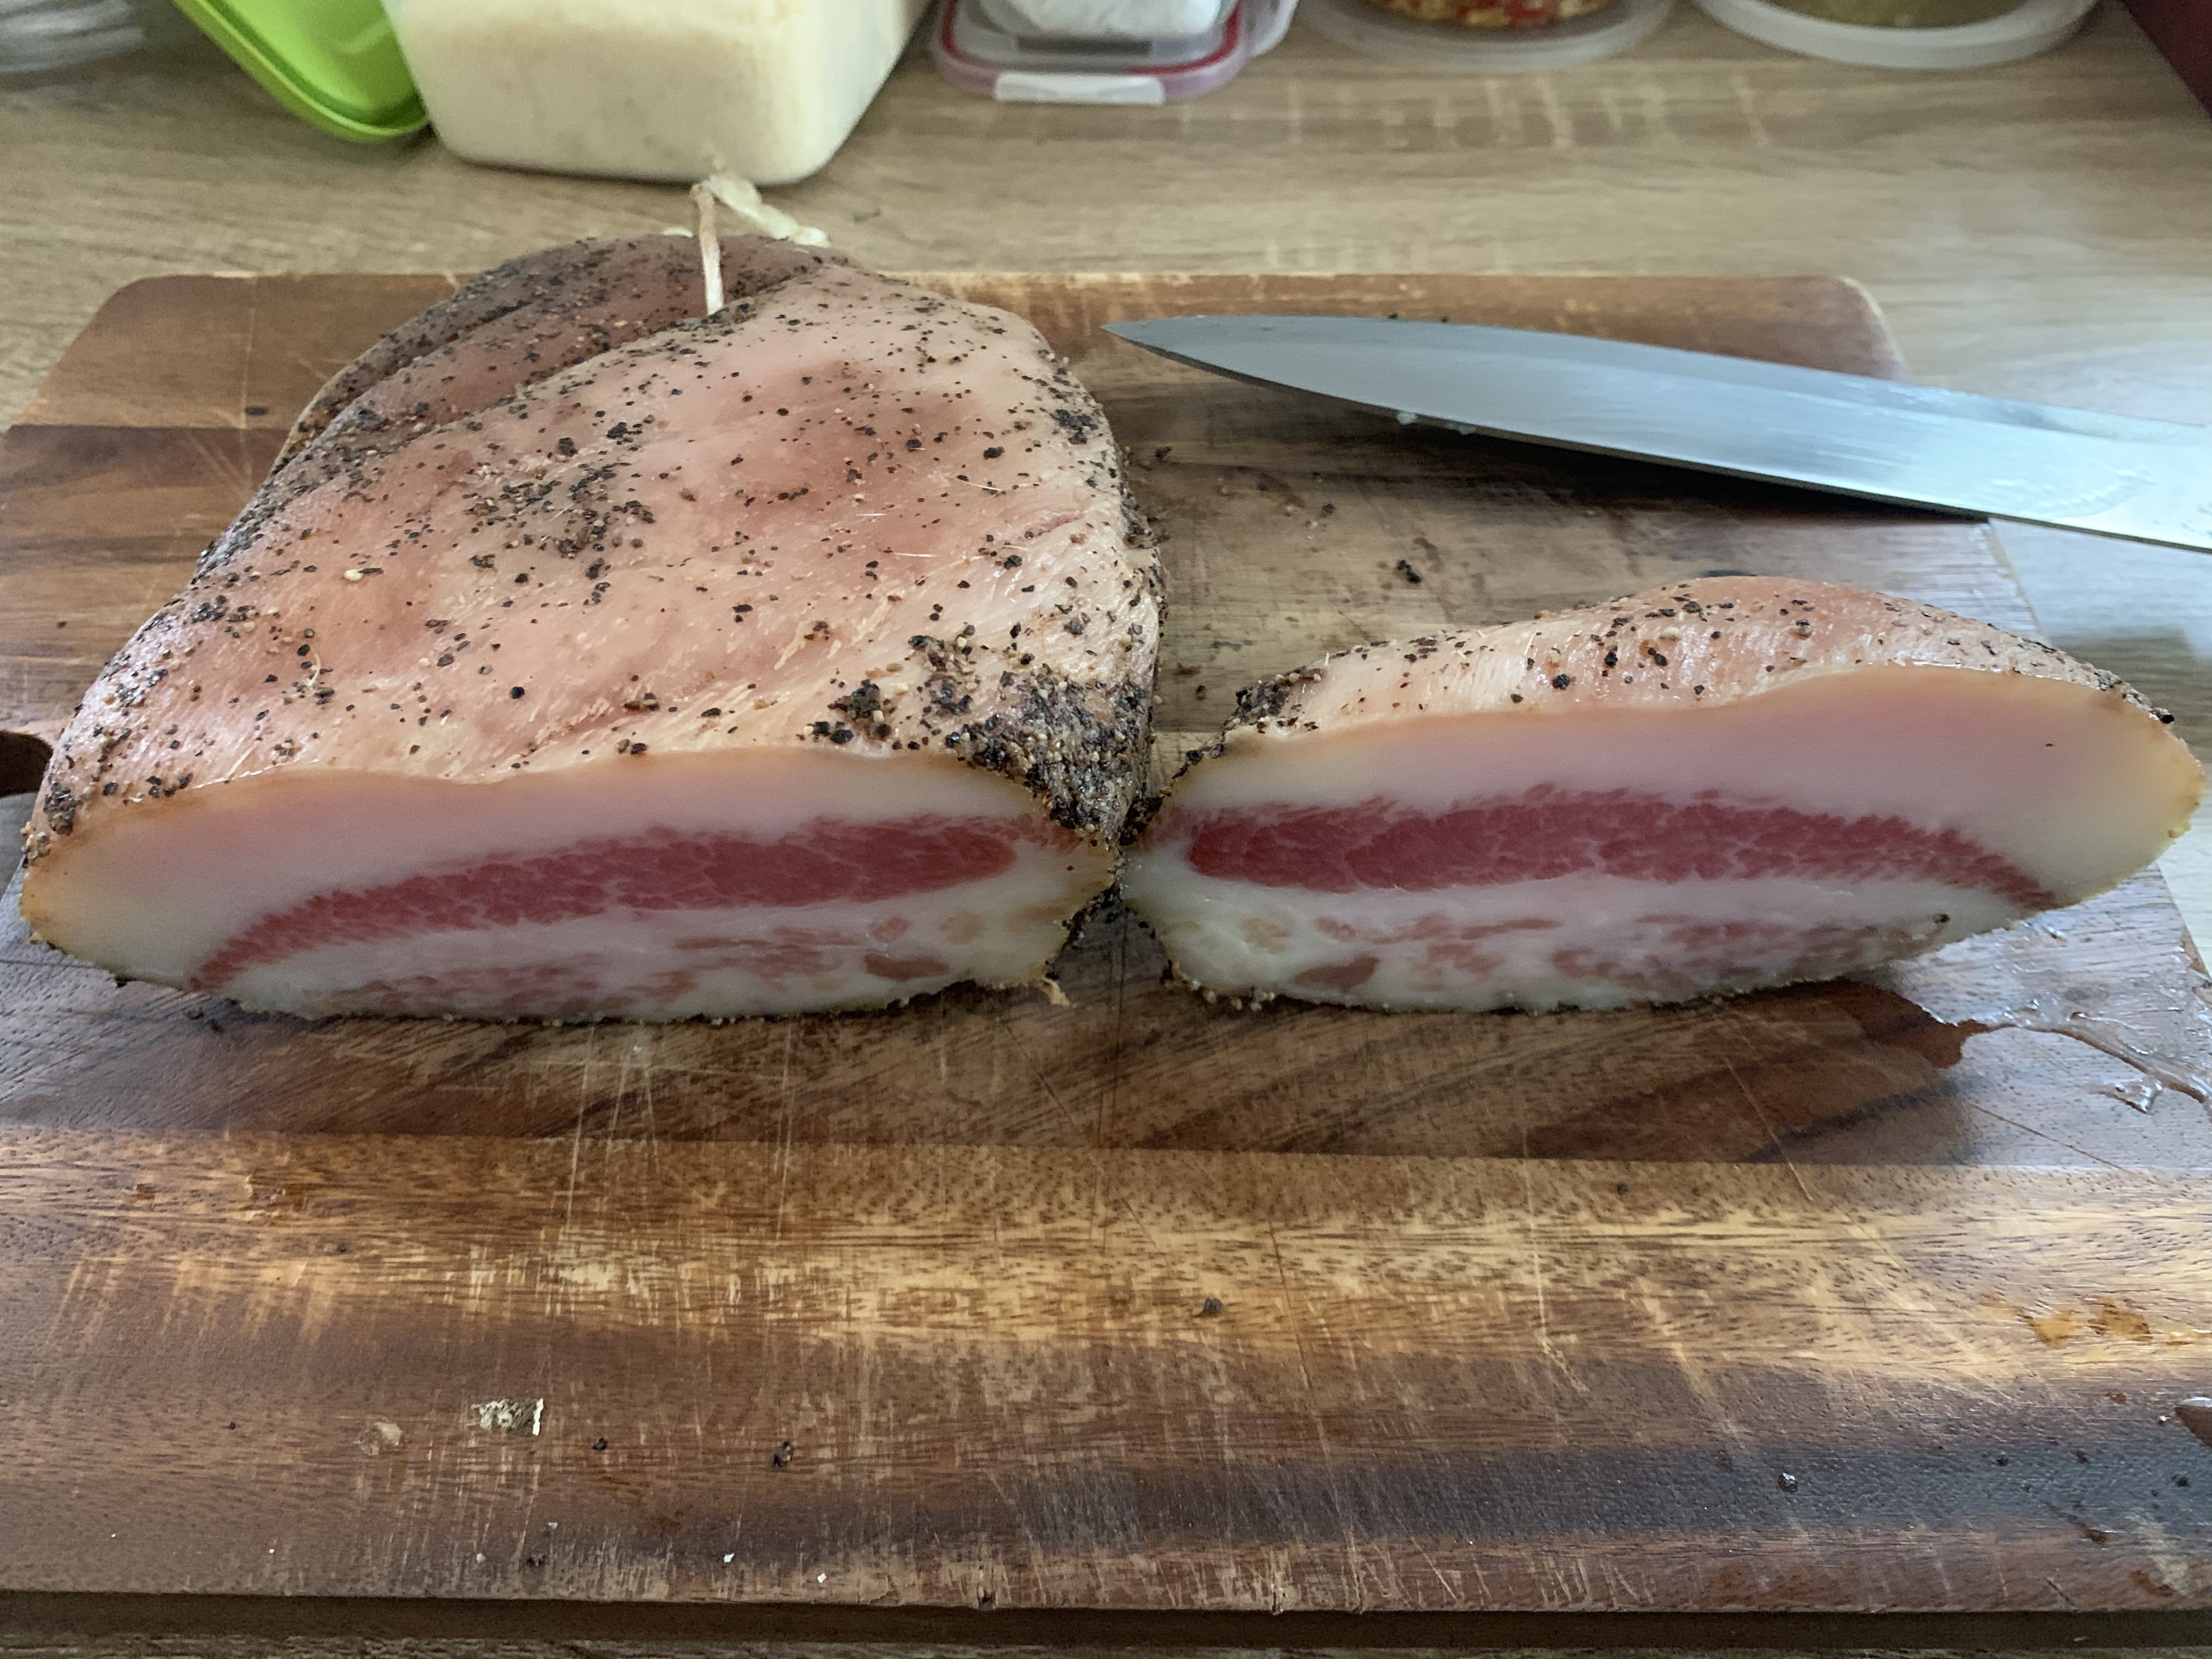 Guanciale, cured pork cheek. Loving this product perfect for